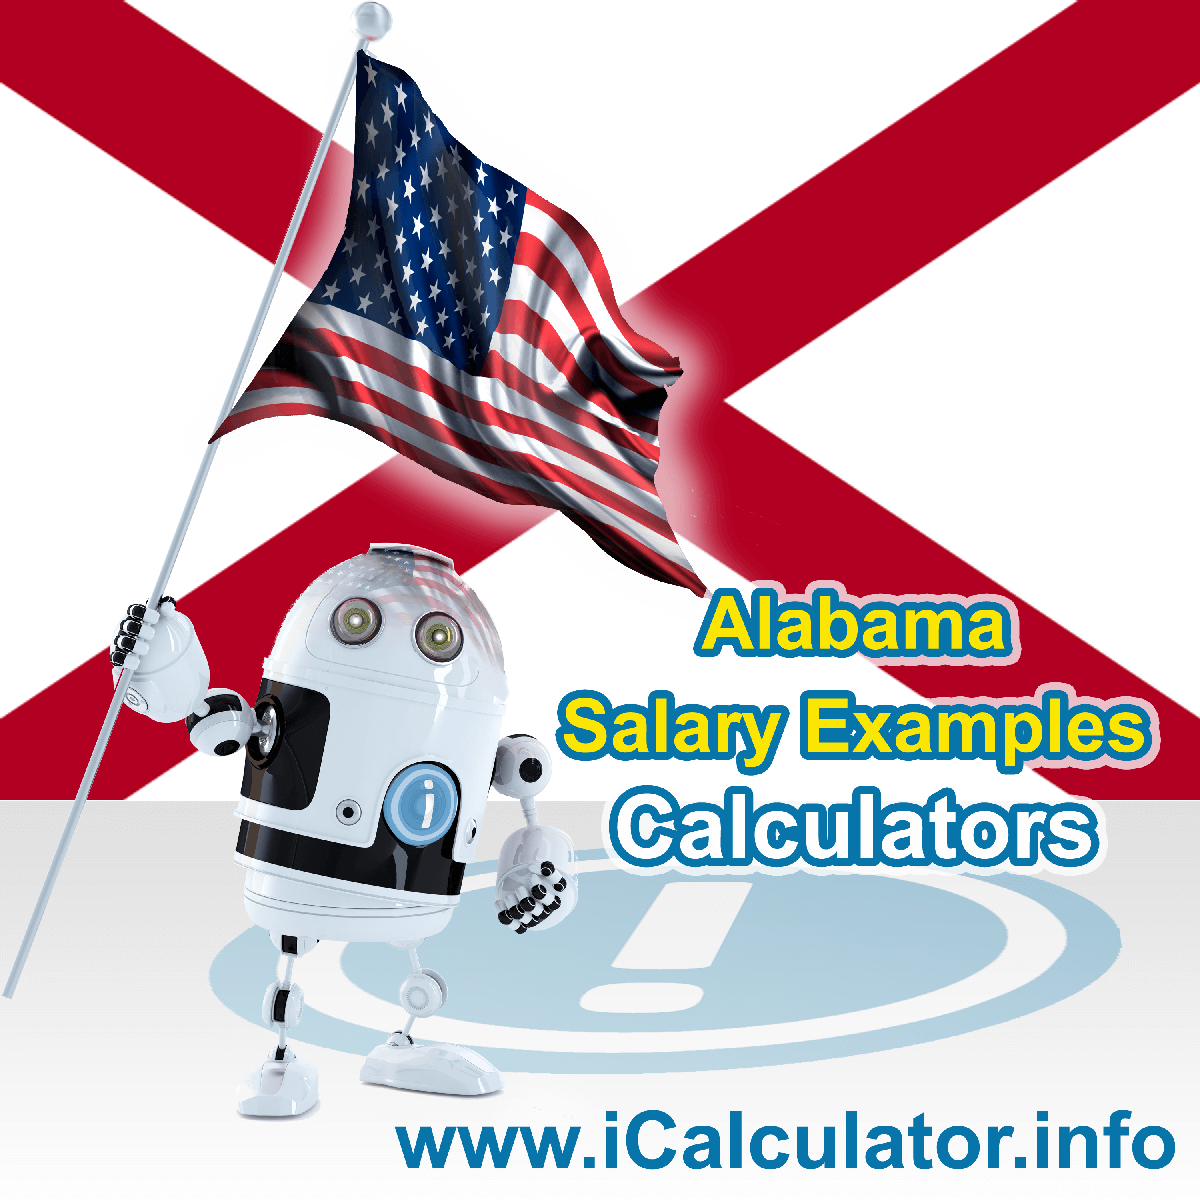 Alabama Salary Example for $ 280,000.00 in 2023 | iCalculator™ | $ 280,000.00 salary example for employee and employer paying Alabama State tincome taxes. Detailed salary after tax calculation including Alabama State Tax, Federal State Tax, Medicare Deductions, Social Security, Capital Gains and other income tax and salary deductions complete with supporting Alabama state tax tables 